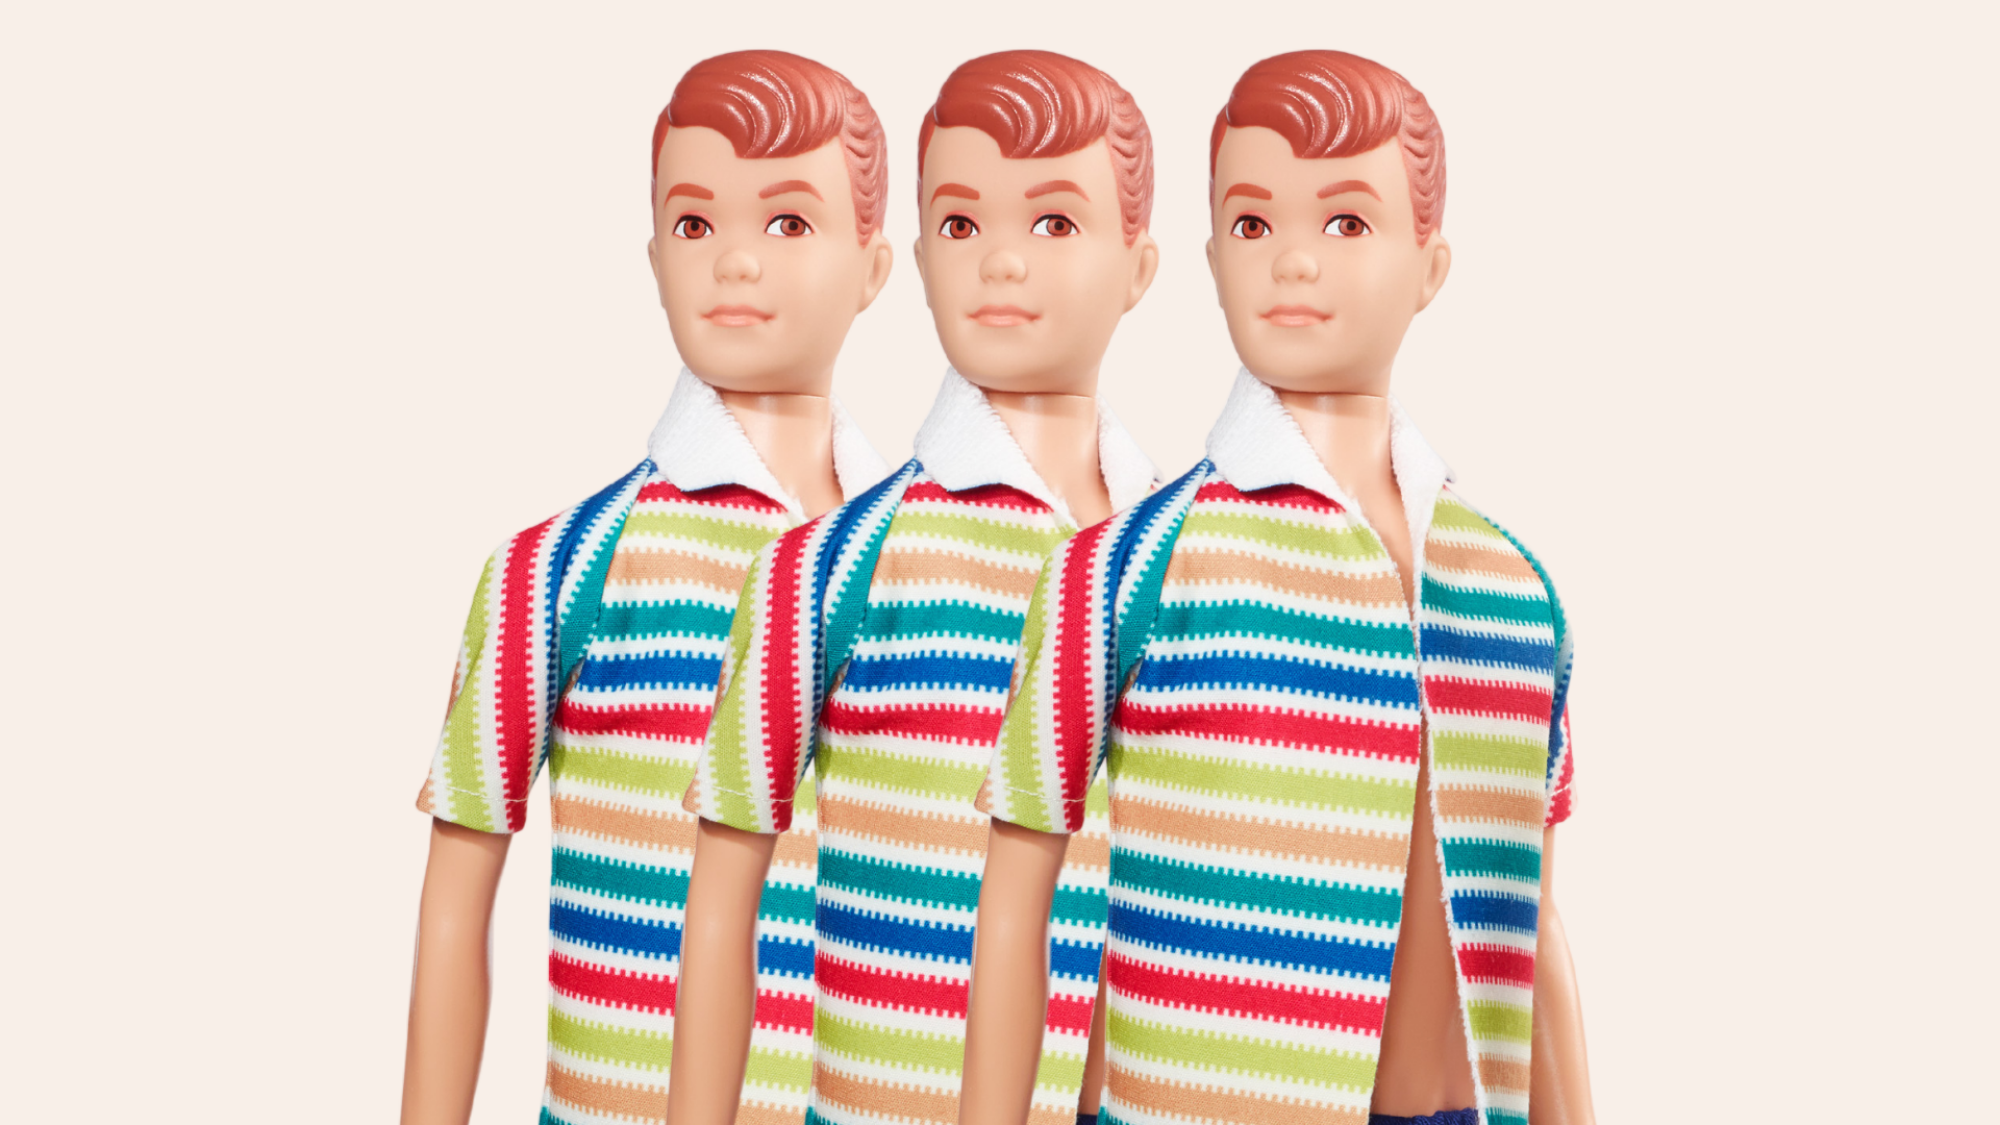 The Allan doll, in his signature striped collared shirt.